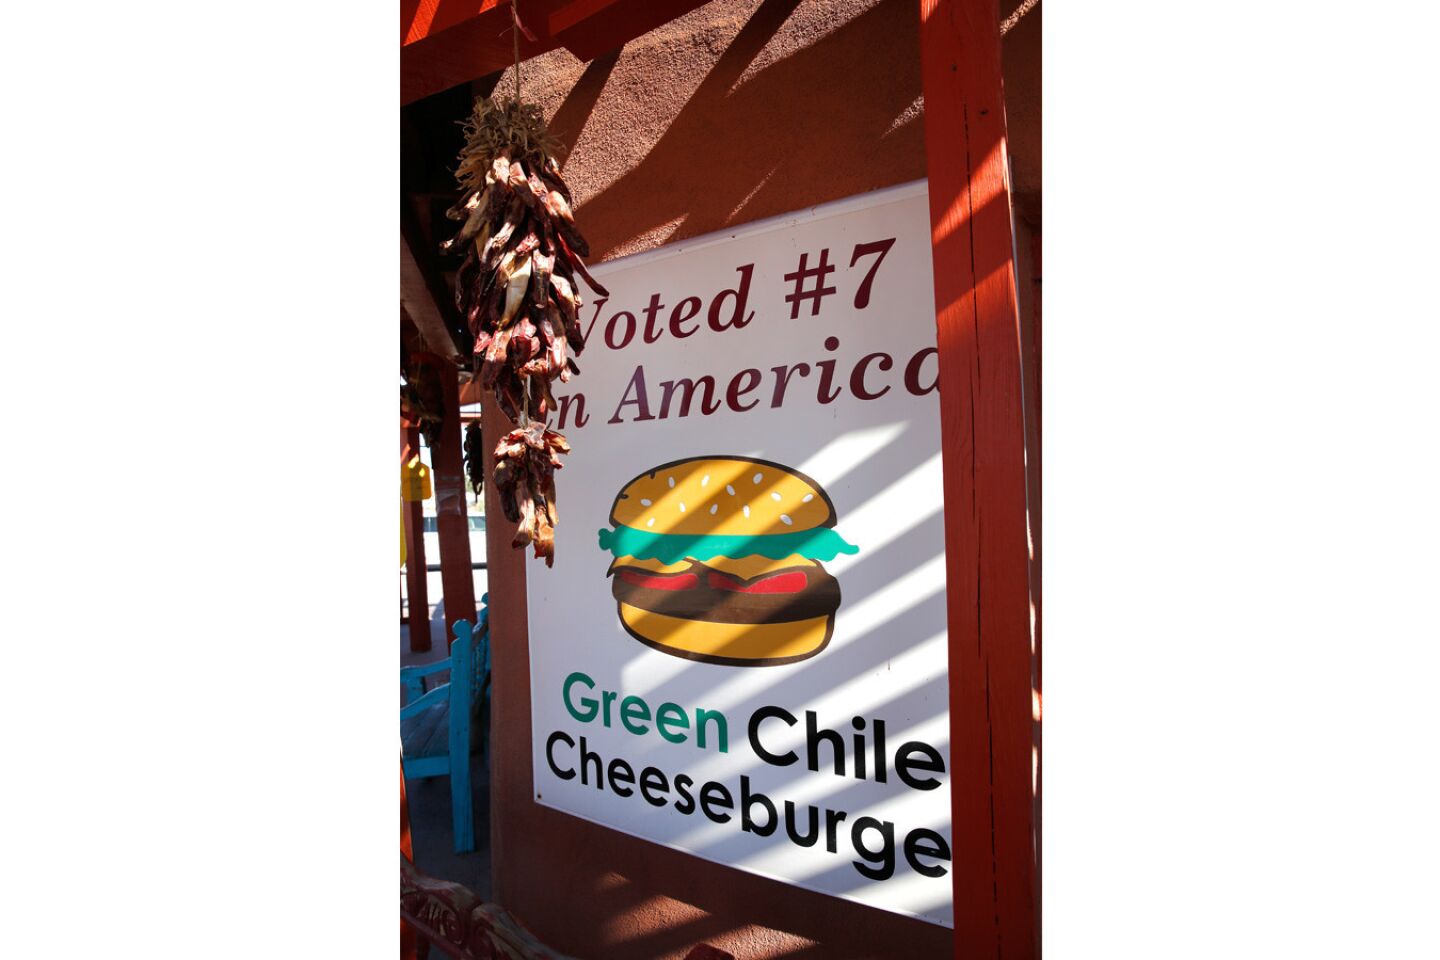 Hatch chile burgers in New Mexico